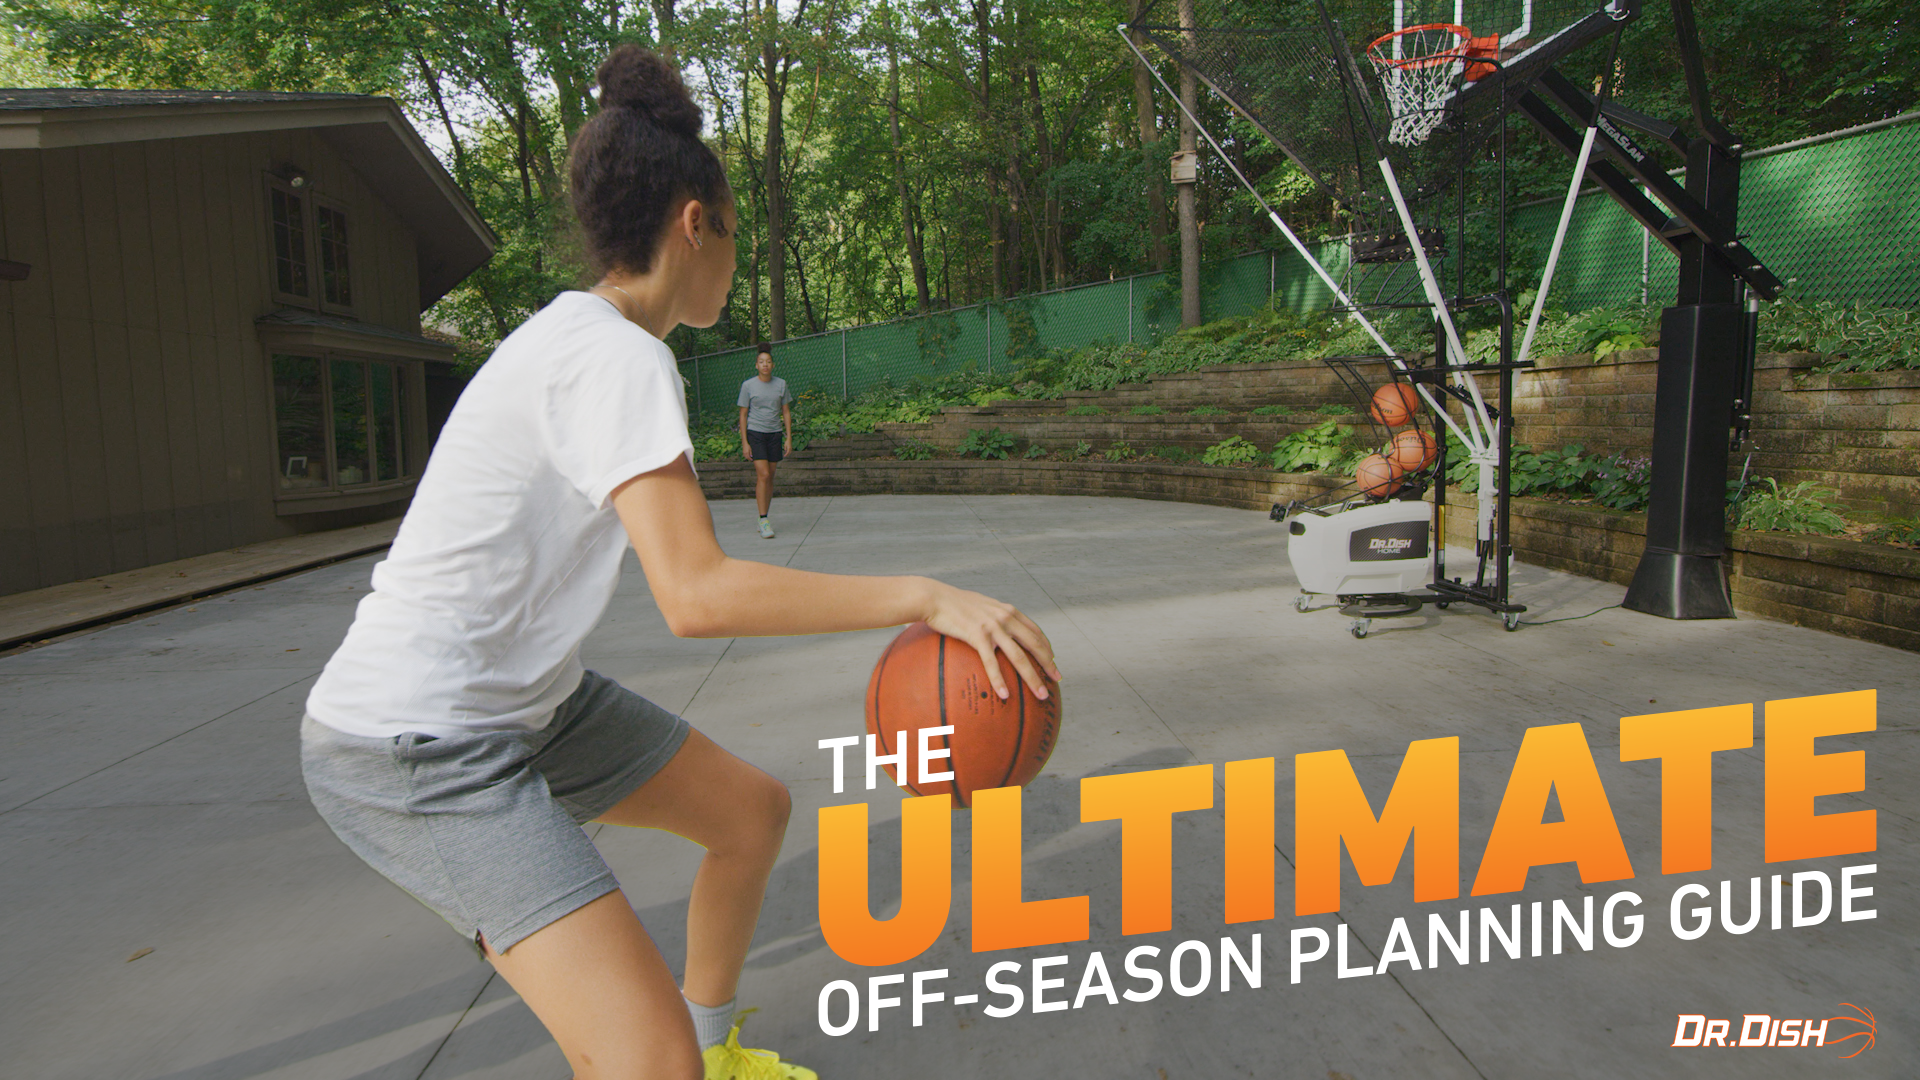 The Ultimate Offseason Checklist Guide for Parents, Players, and Coaches